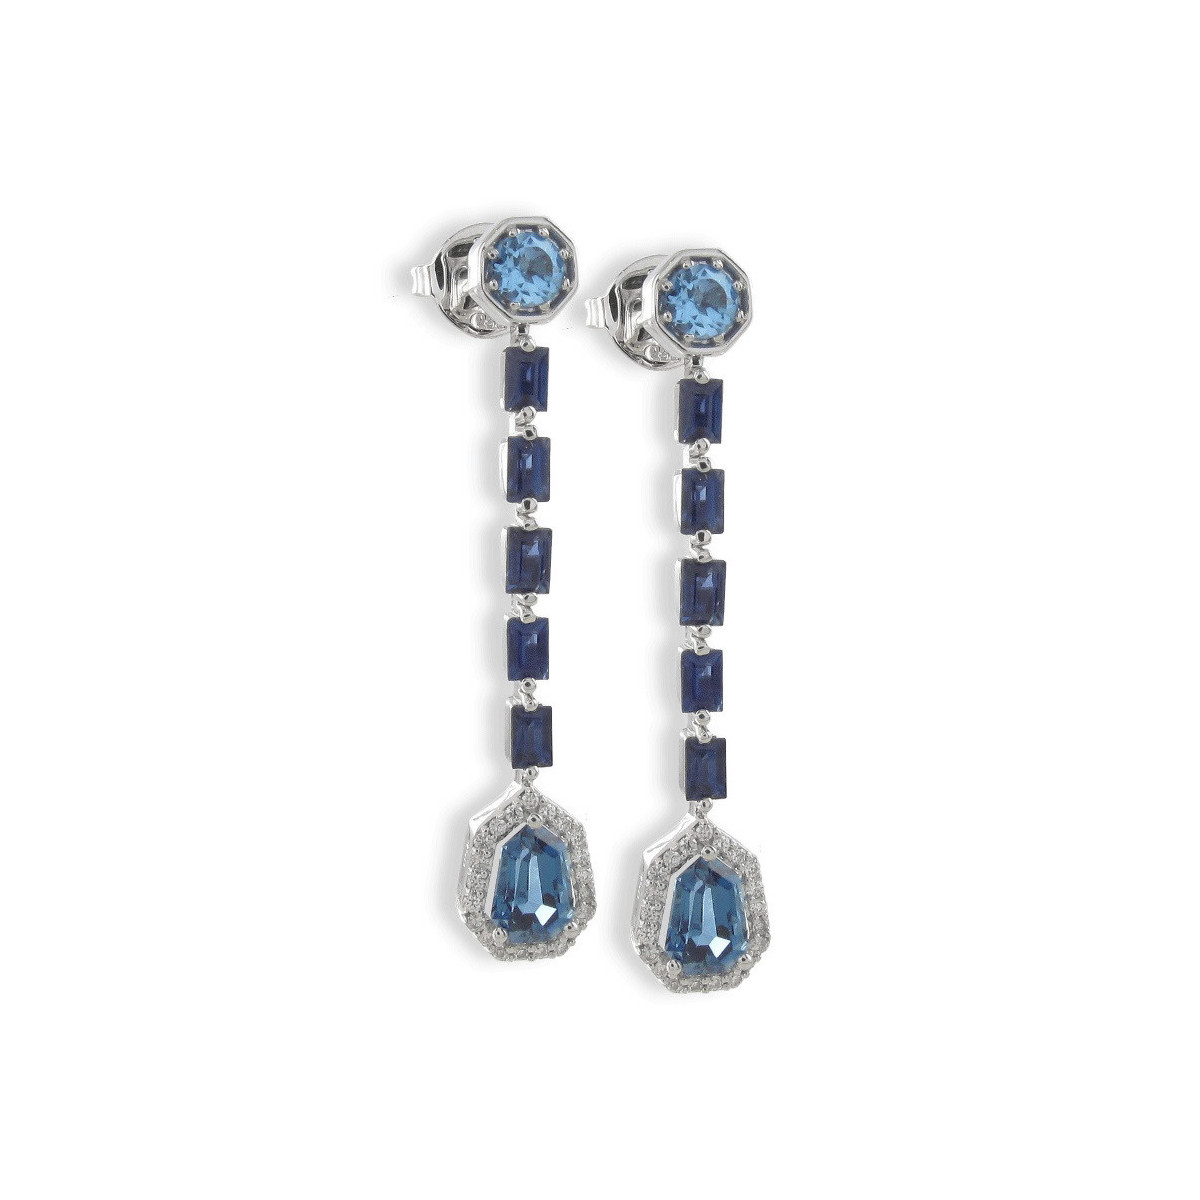 LONG EARRINGS WITH BLUE STONES